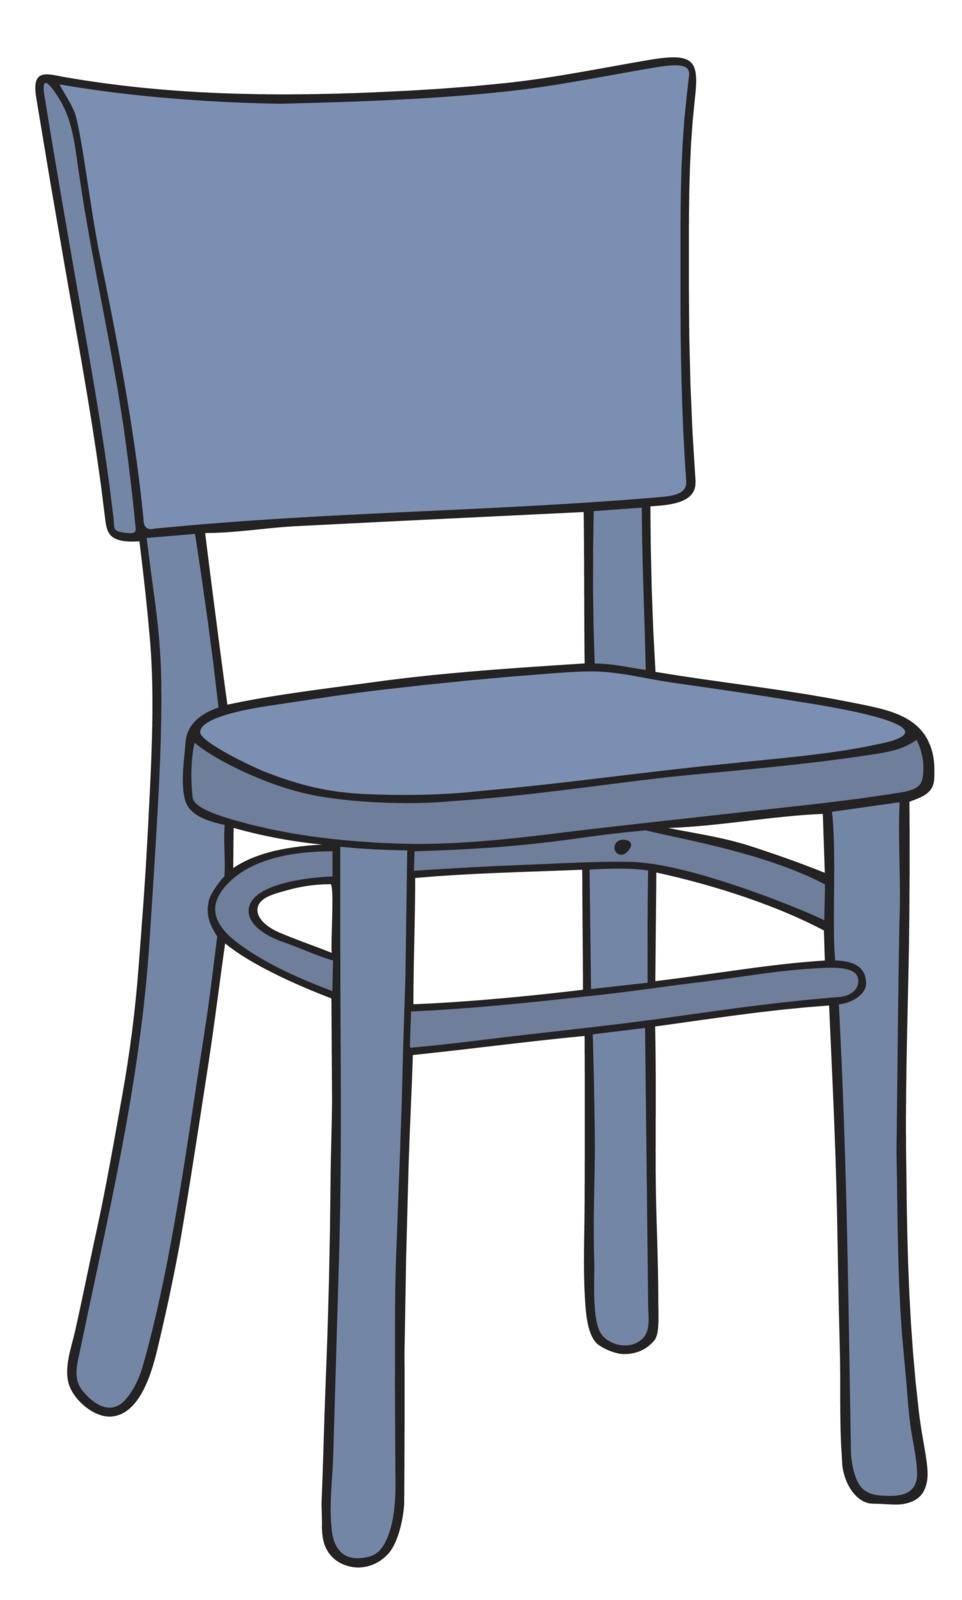 Hand drawing of a blue classic wooden chair